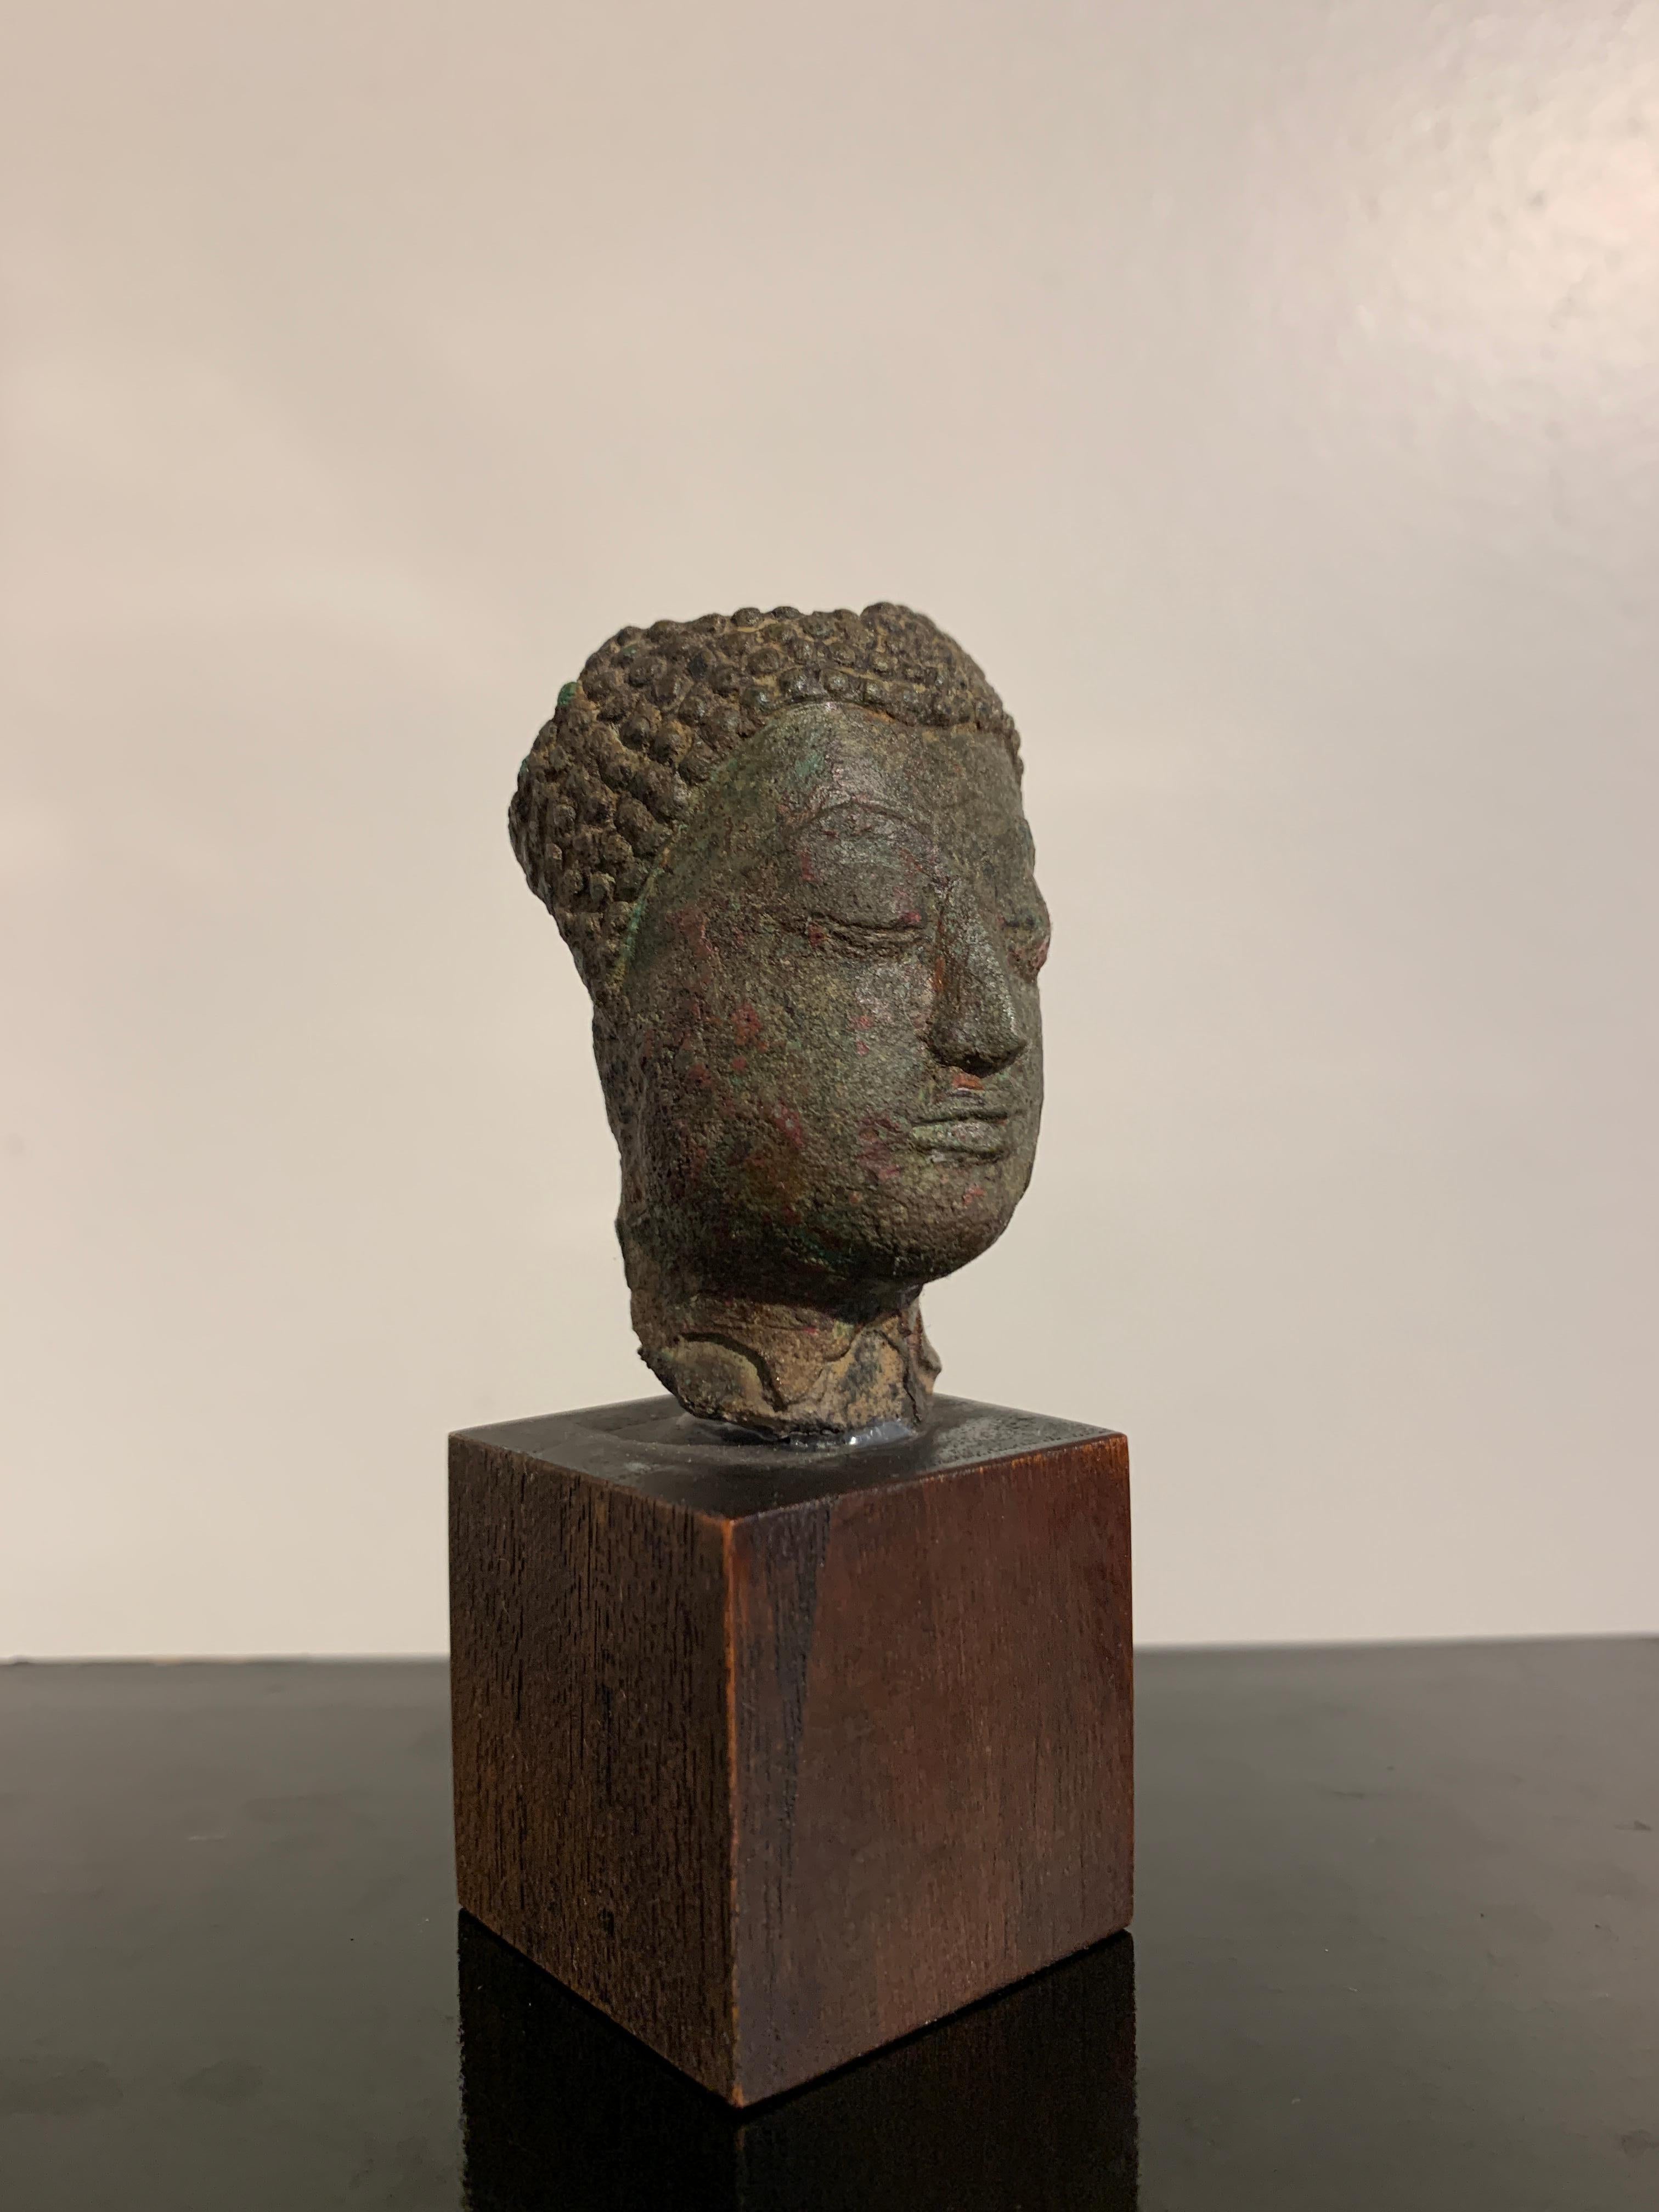 A small mounted Thai bronze Buddha head, late Sukhothai period, style of Kamphaeng Phet, 14th-15th century, Thailand.

The small Buddha head fragmentary, and originally part of a larger figure. The head with typical features of the Kamphaeng Phet